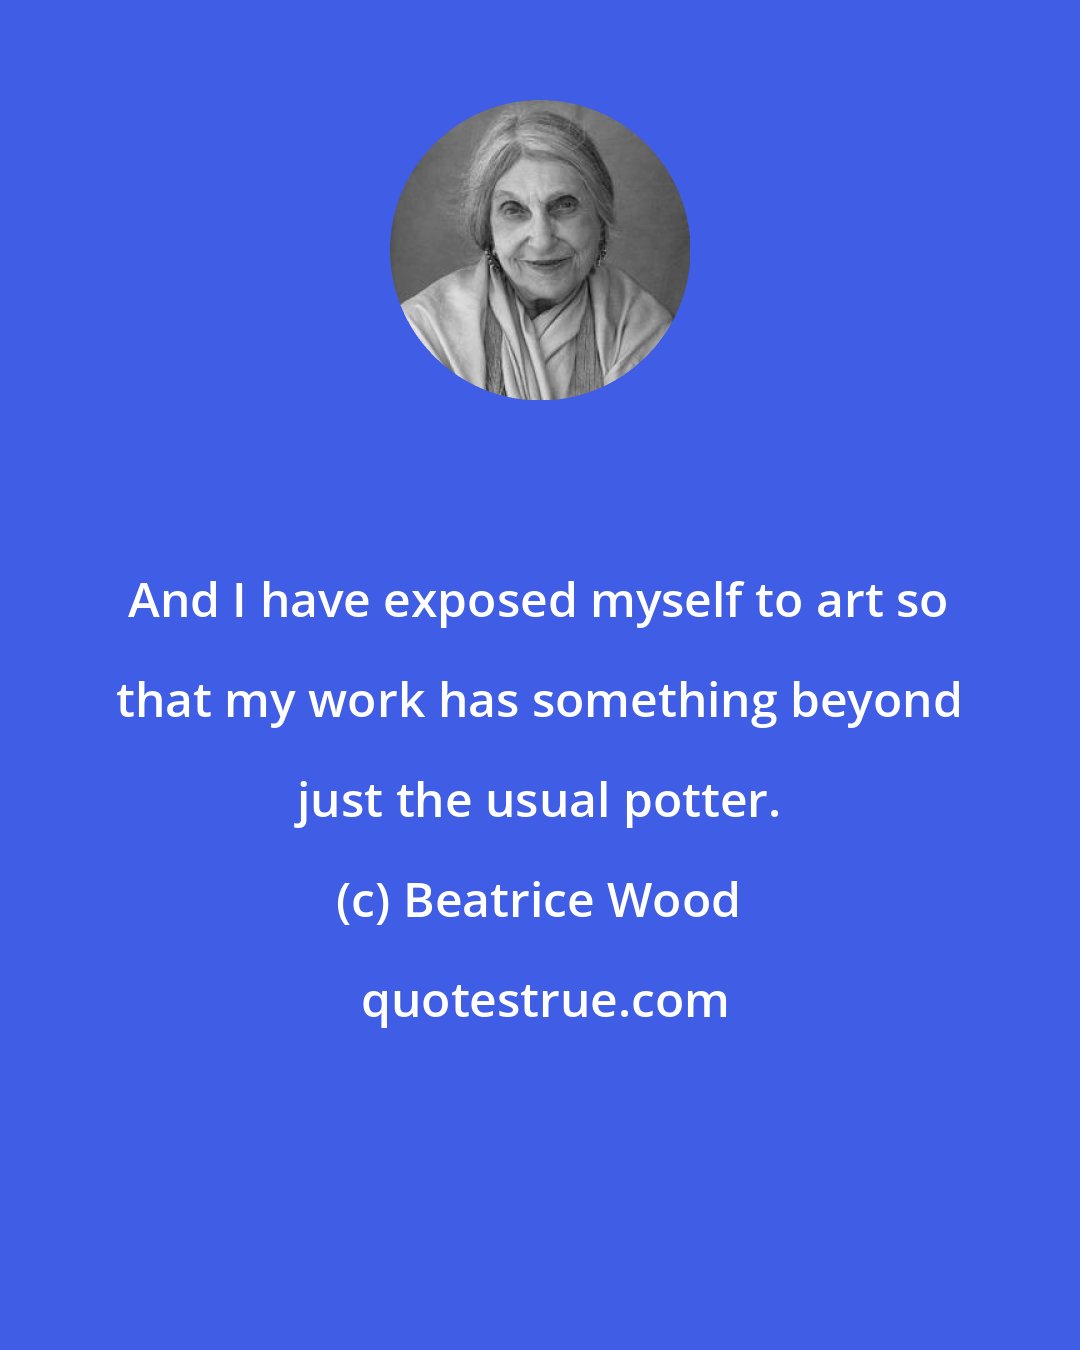 Beatrice Wood: And I have exposed myself to art so that my work has something beyond just the usual potter.